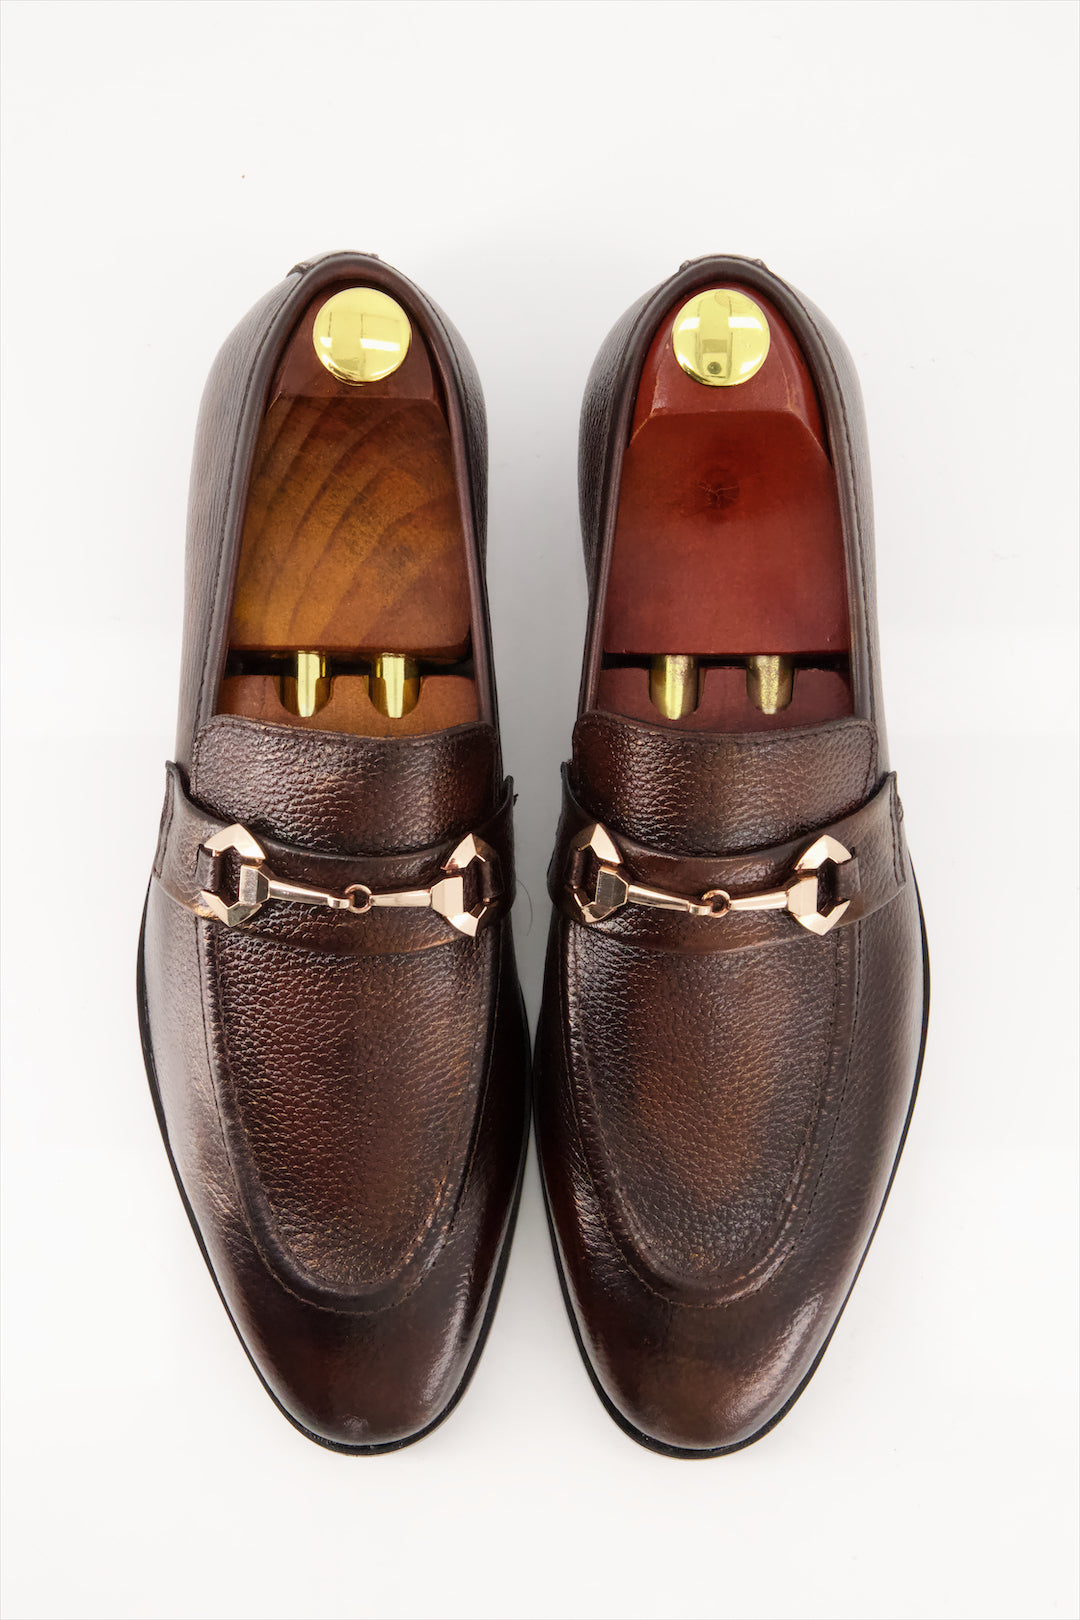 Monarch Buckle Loafers - Premium Leather Dress Shoes